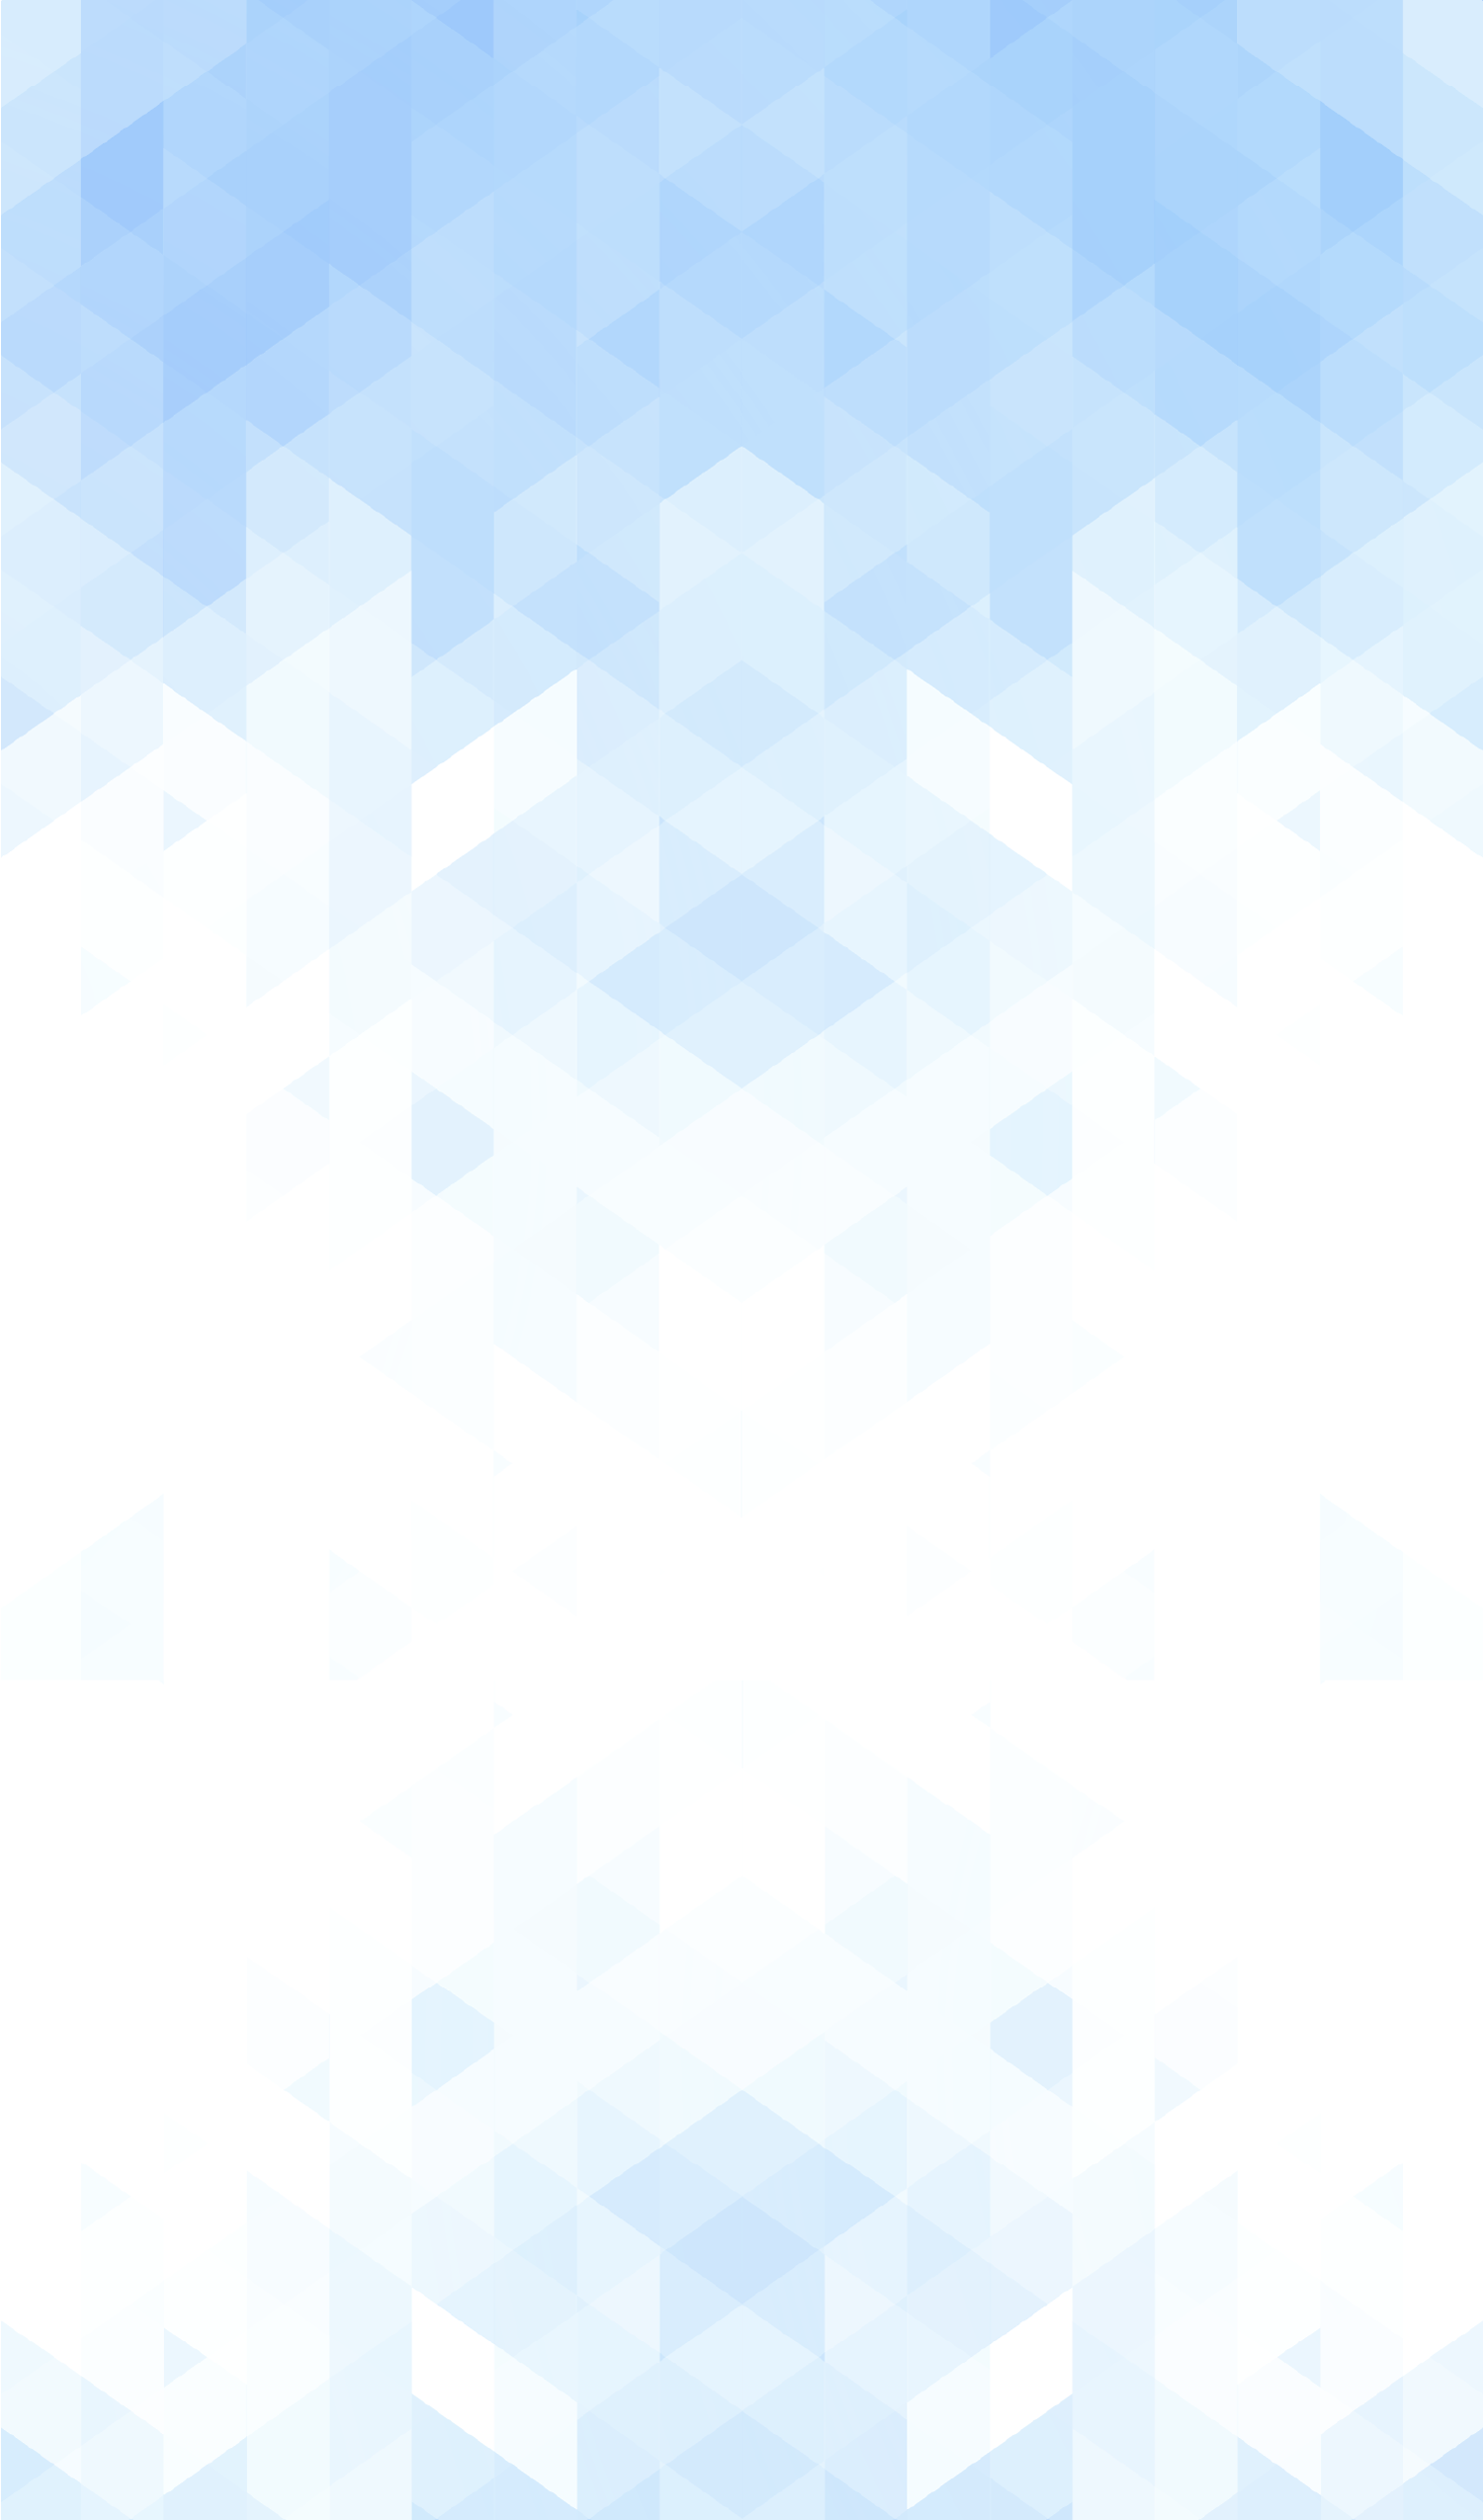 Vertical abstract white background with blue gradient shapes